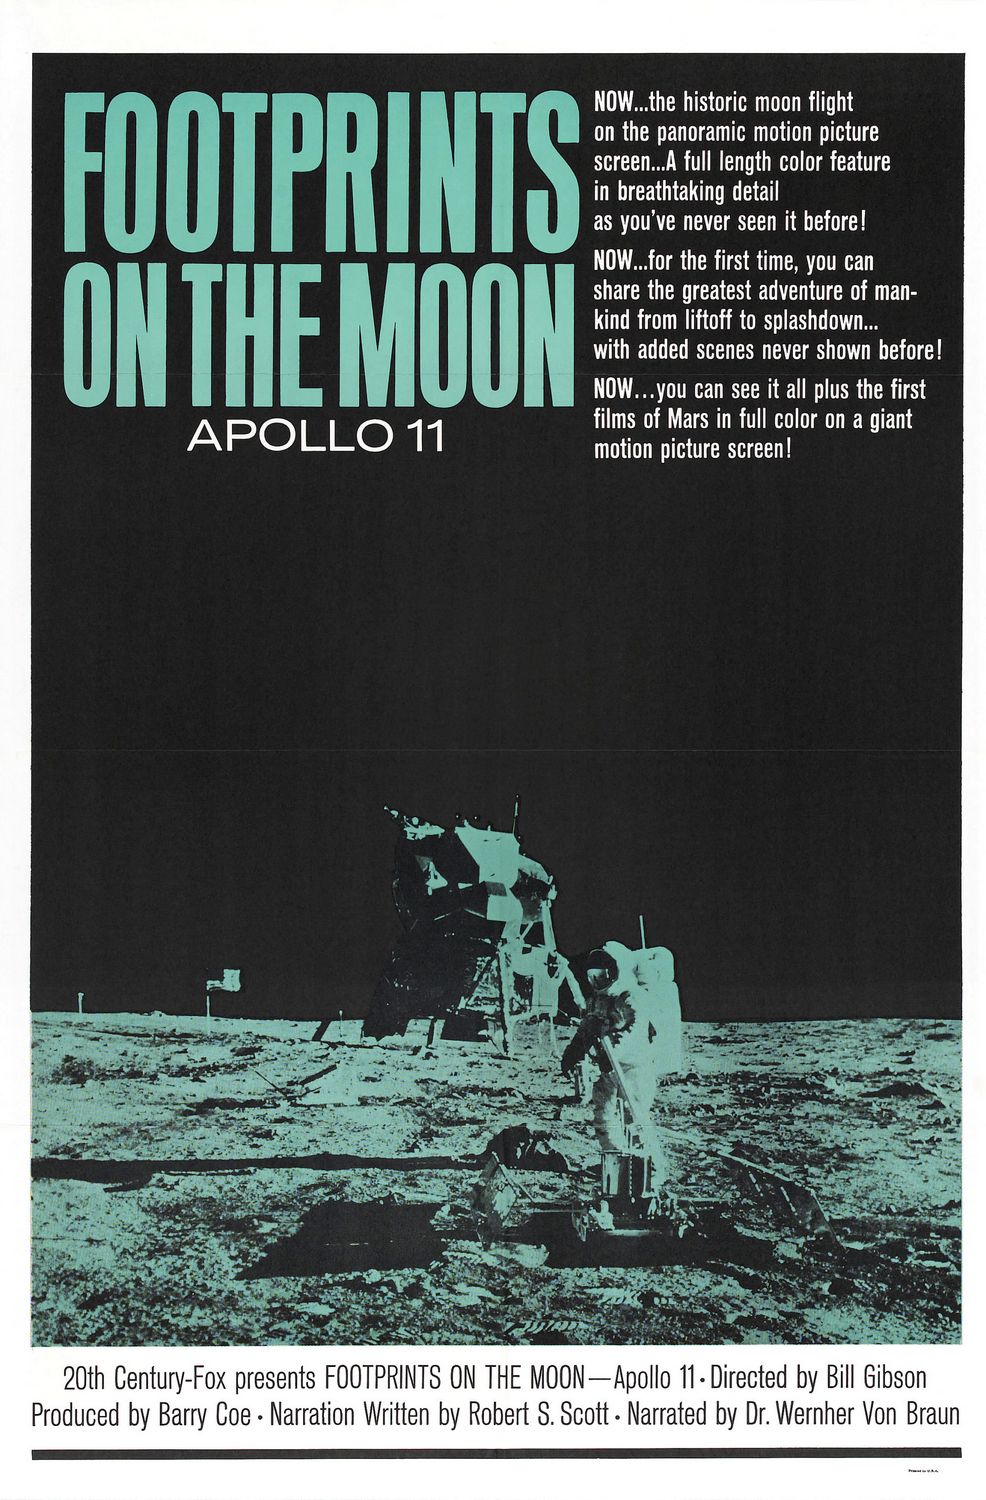 Extra Large Movie Poster Image for Footprints on the Moon: Apollo 11 